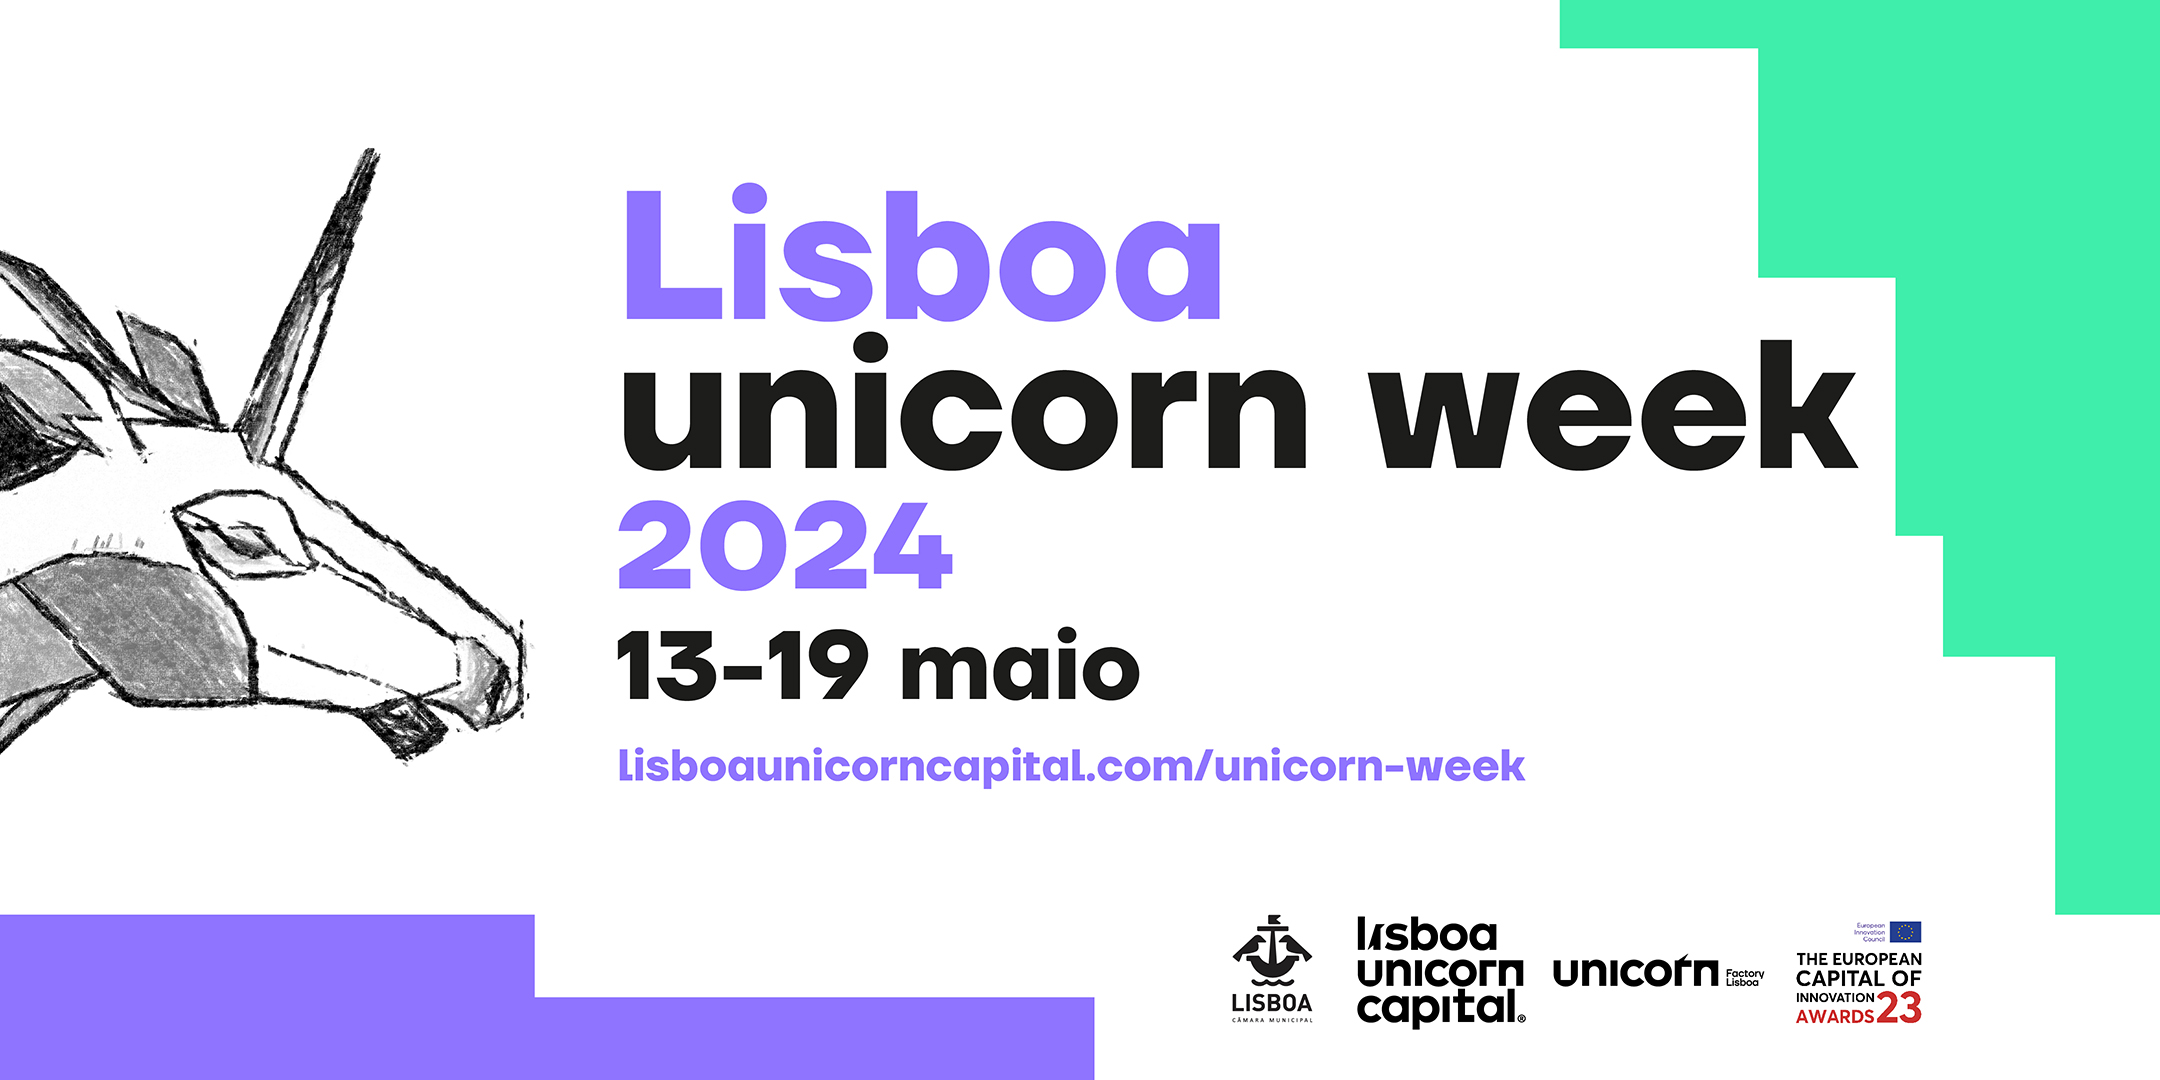 The 13th UNICORN WEEK is coming up from May 13 to 19